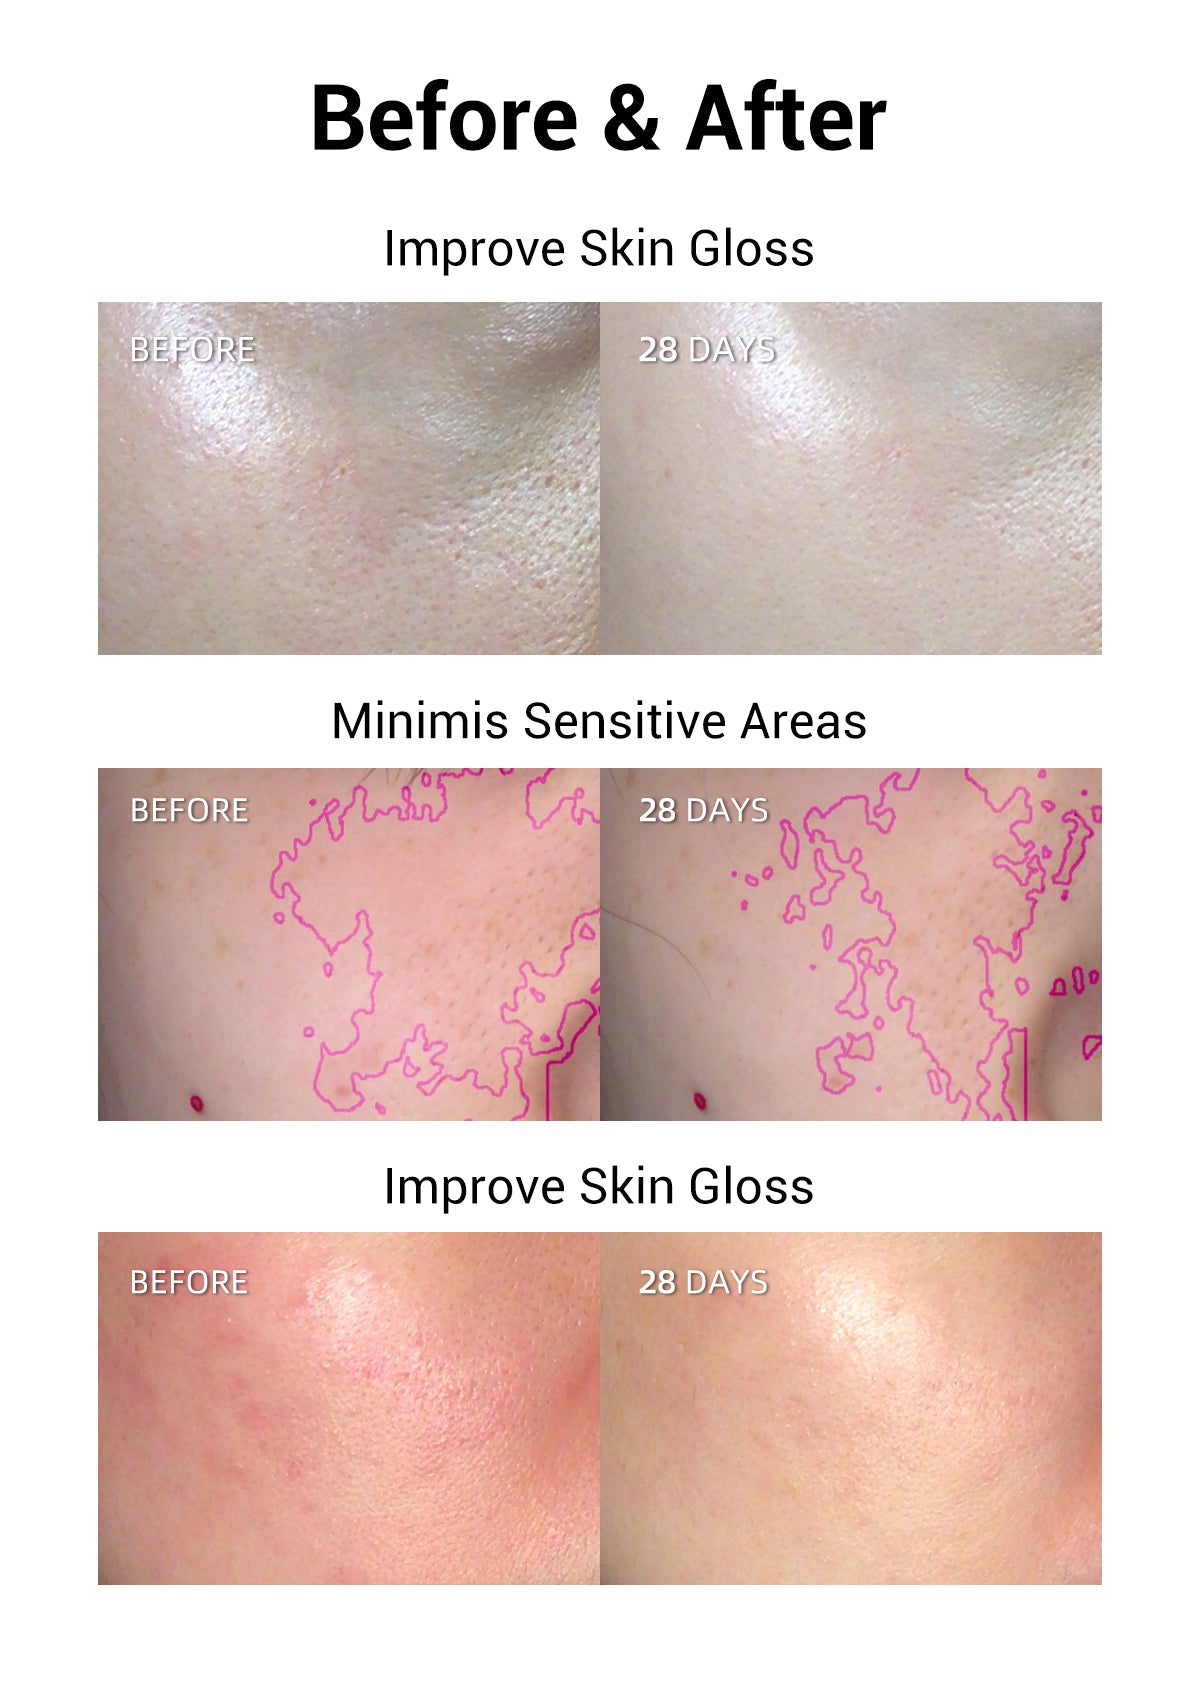 Before and after comparison of skin showing enhanced gloss and minimized sensitive areas following 28 days of treatment.